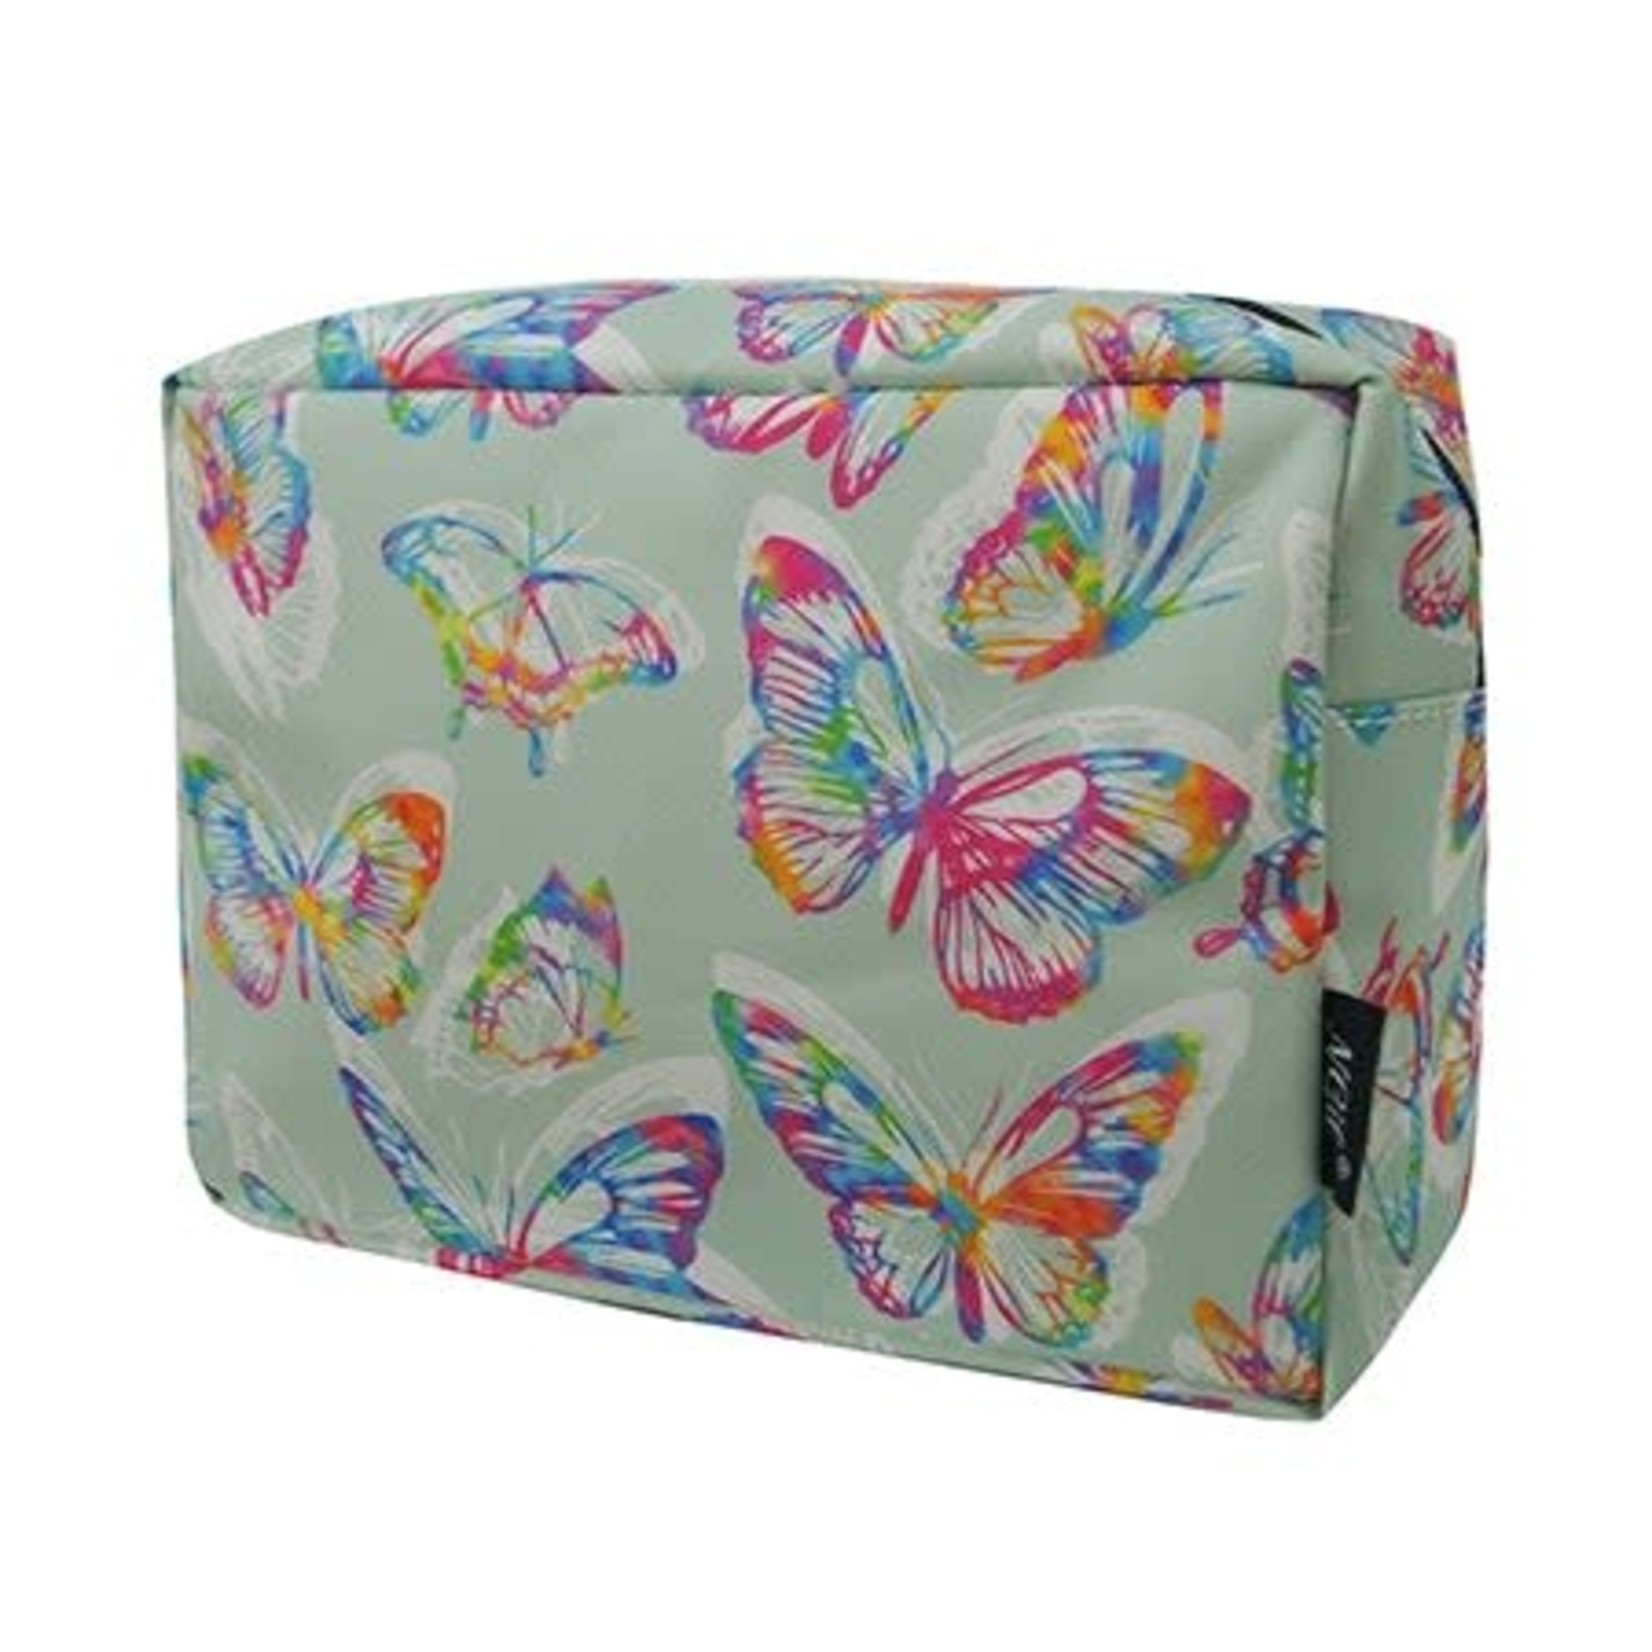 NNK Creations Large Cosmetic Travel Pouch